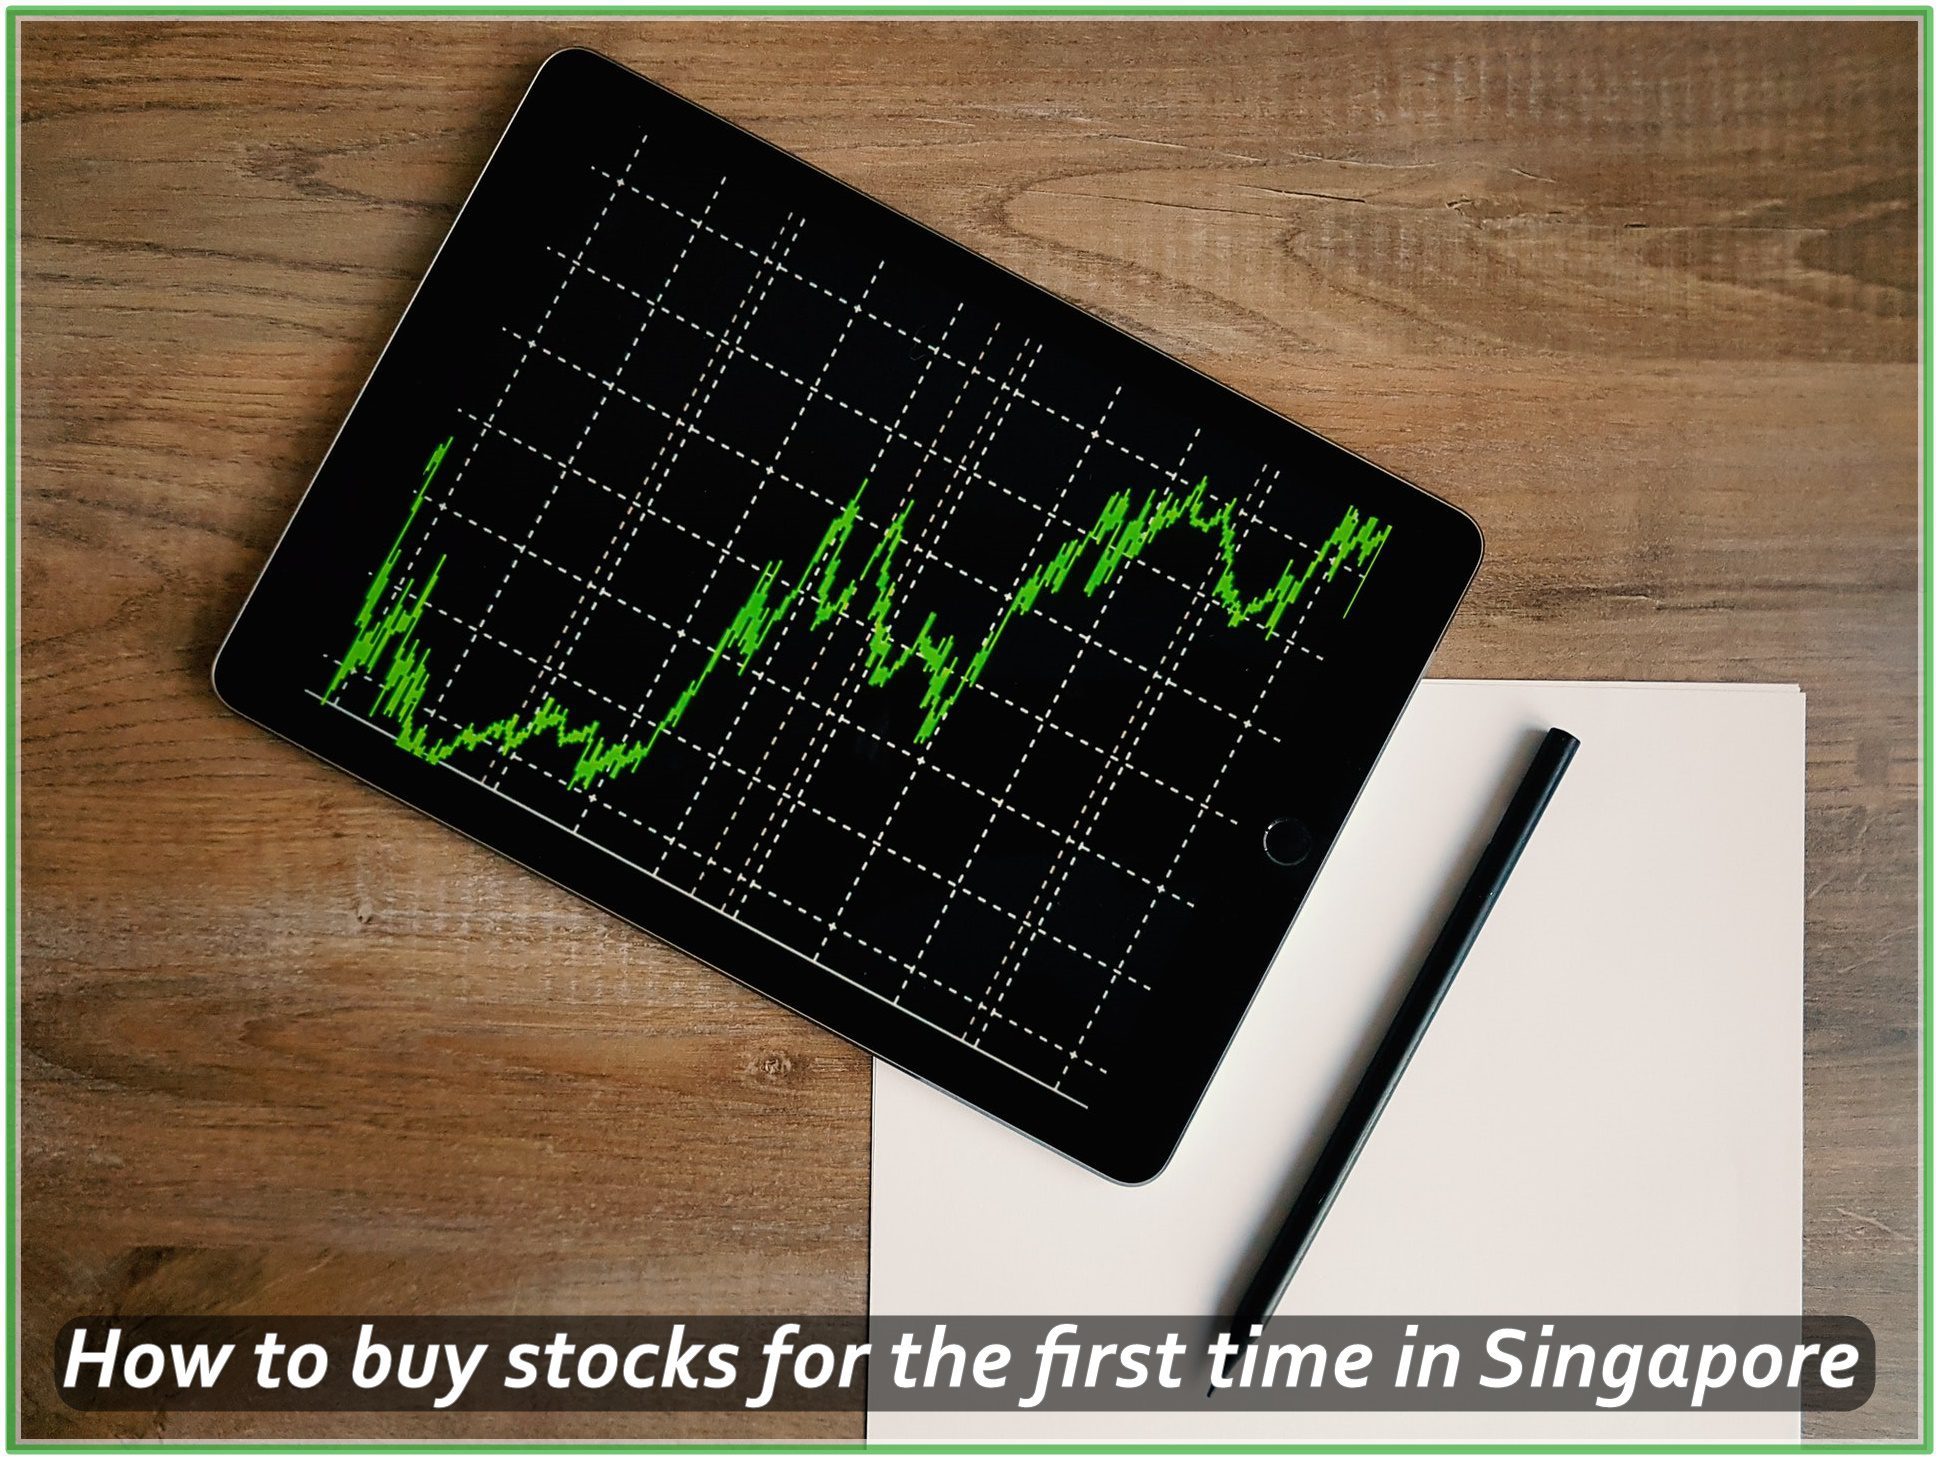 How to buy stocks for the first time in Singapore